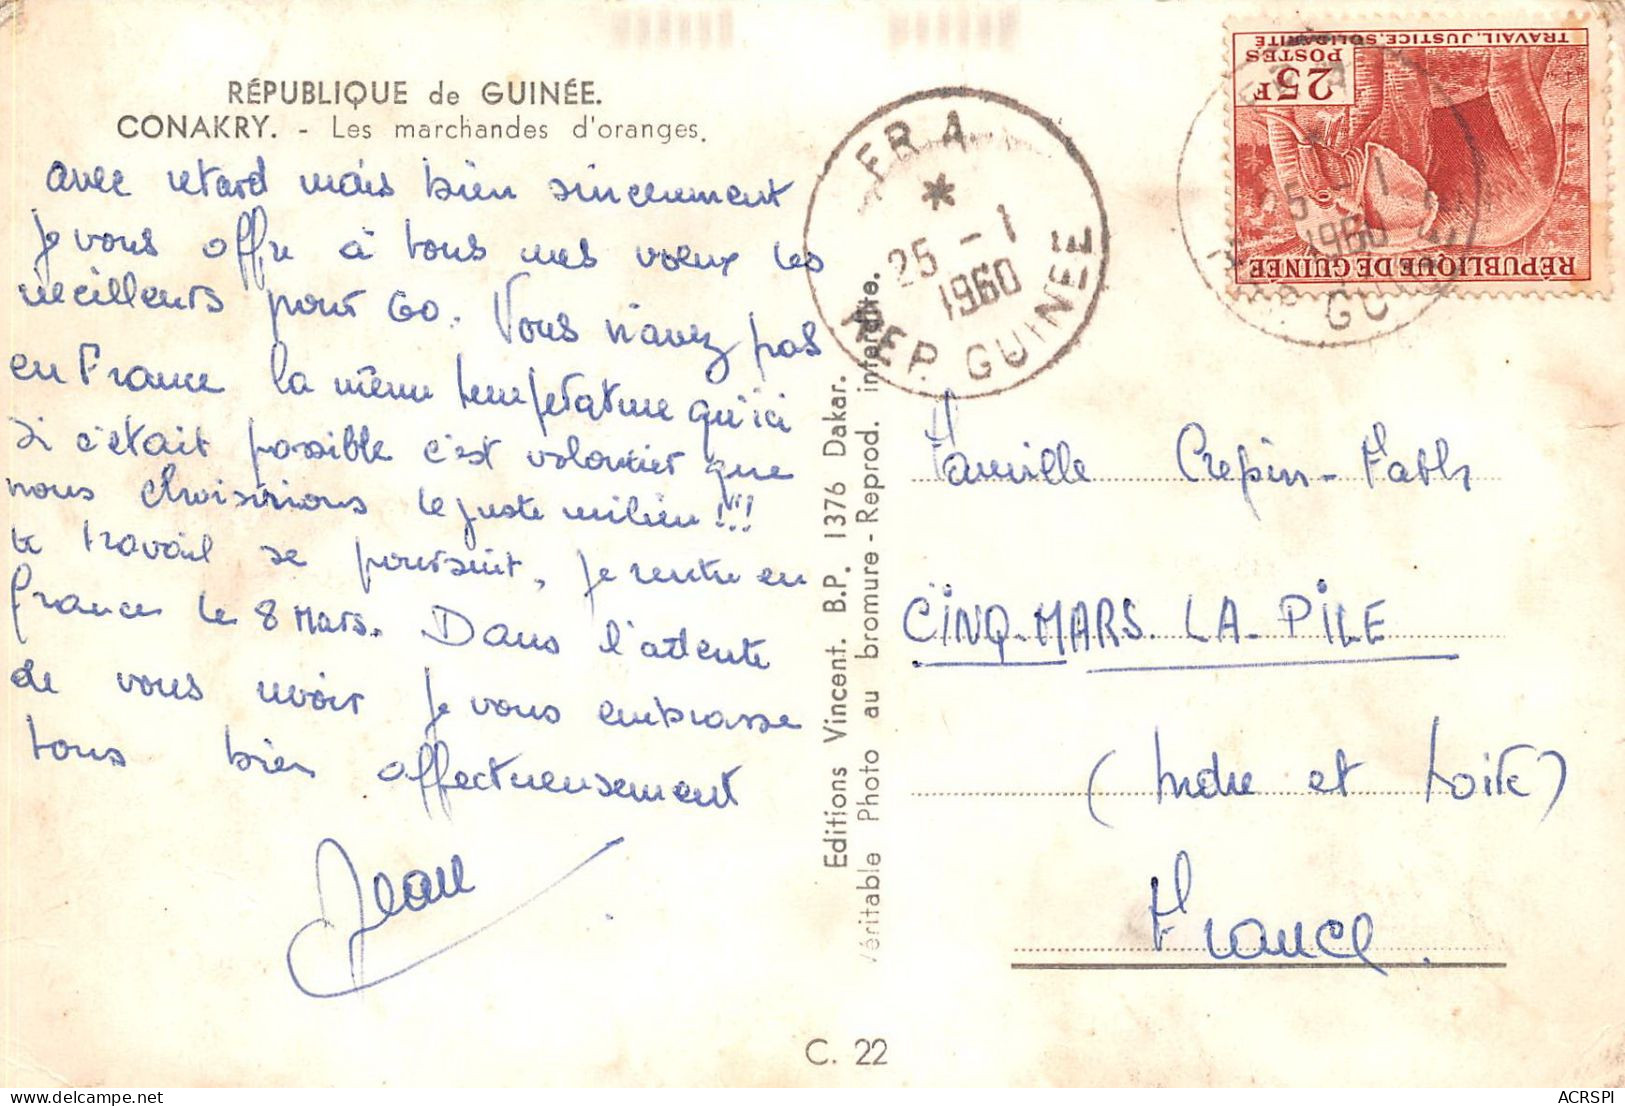 GUINEE Francaise Conakry Marchandes D'oranges OO 0950 - French Guinea